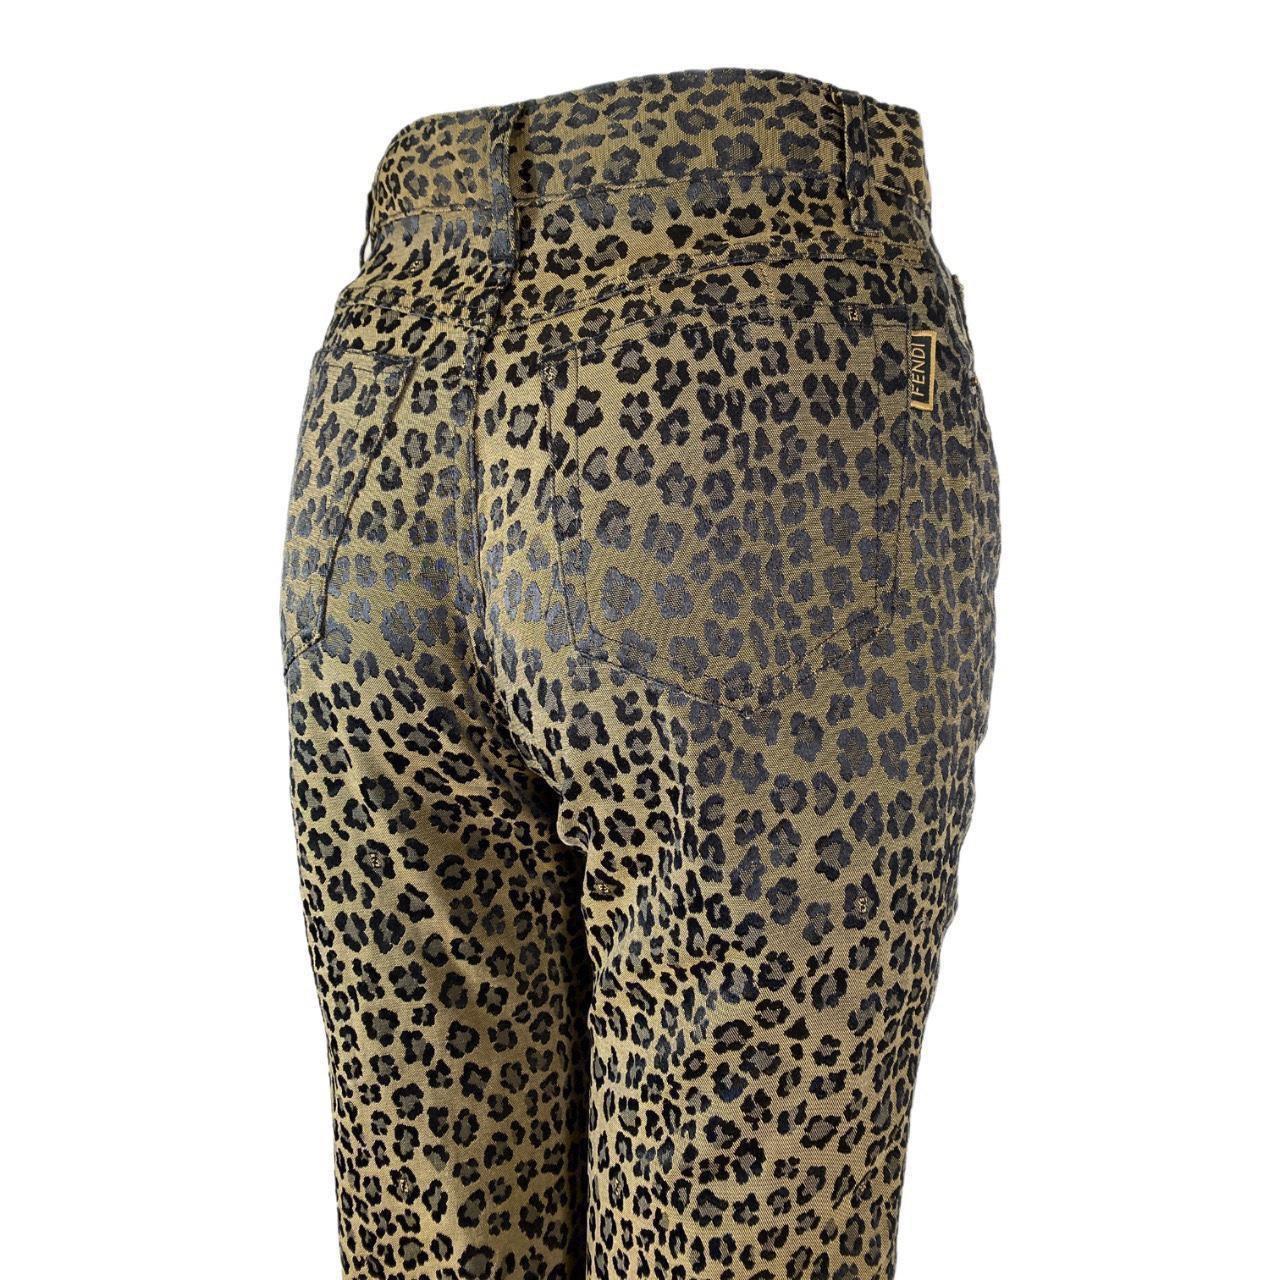 Fendi Trousers 

Leopard High-Waisted Jeans

Classic Zucca Leopard Print

CONDITION: This item is a vintage/pre-worn piece so some signs of natural wear and age are to be expected. However good general condition.

SIZE LABELLED: 28

ACTUAL